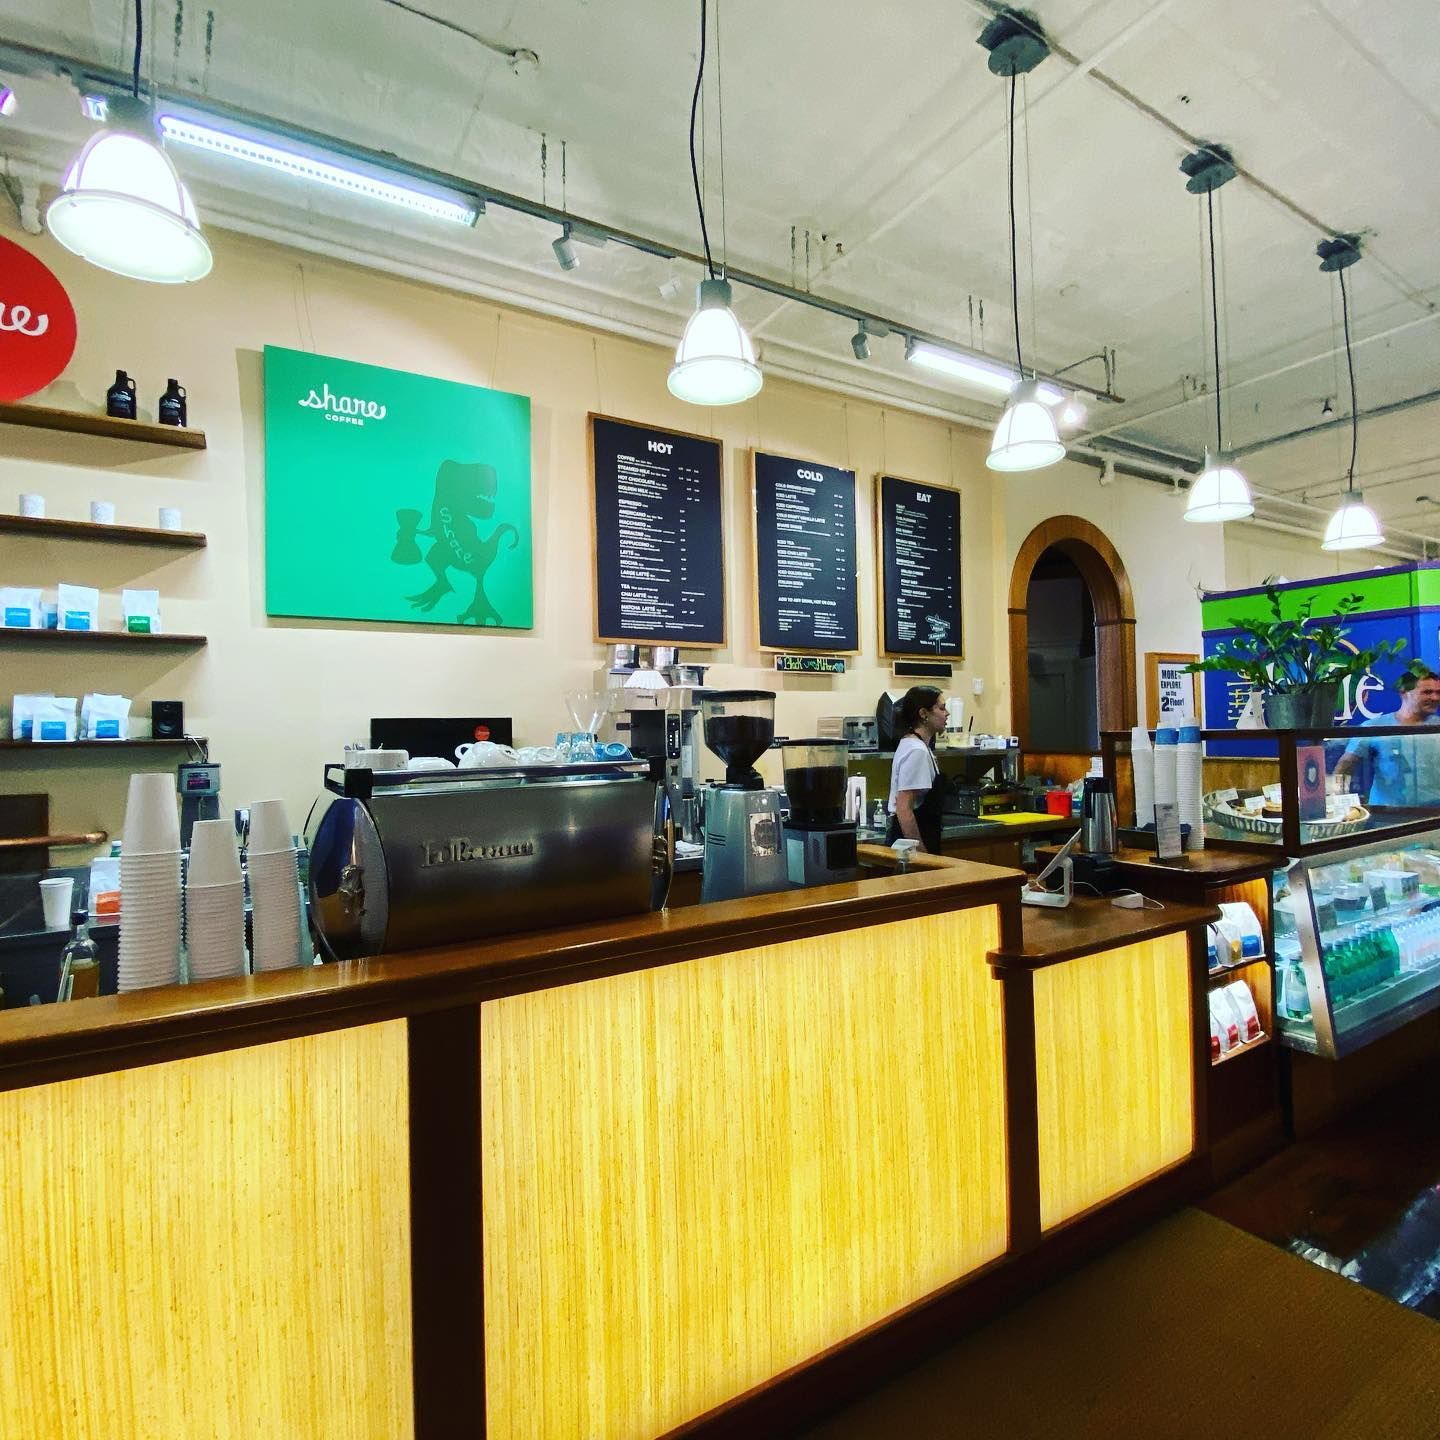 Share Coffee in Thornes is your go-to spot for a cup of coffee and a treat!